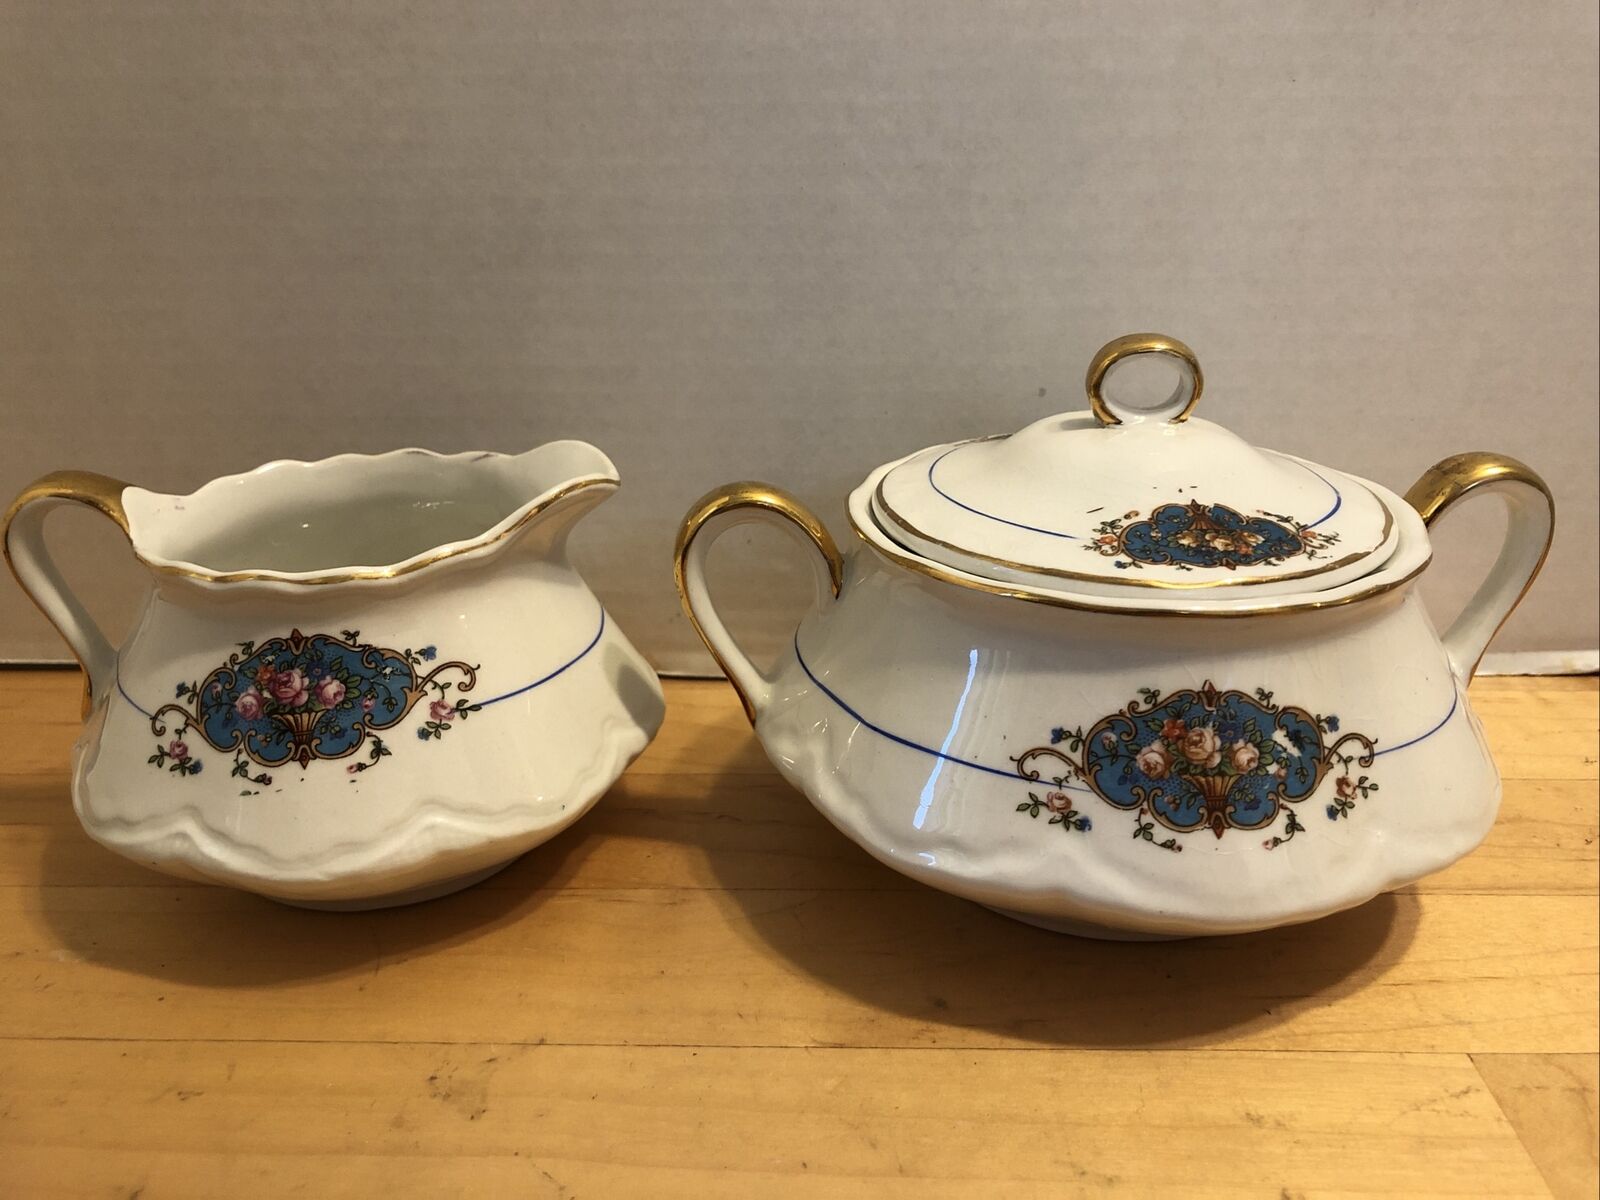 PADEN CITY POTTERY SUGAR BOWL WITH LID AND CREAMER WITH GOLD TRIM VINTAGE